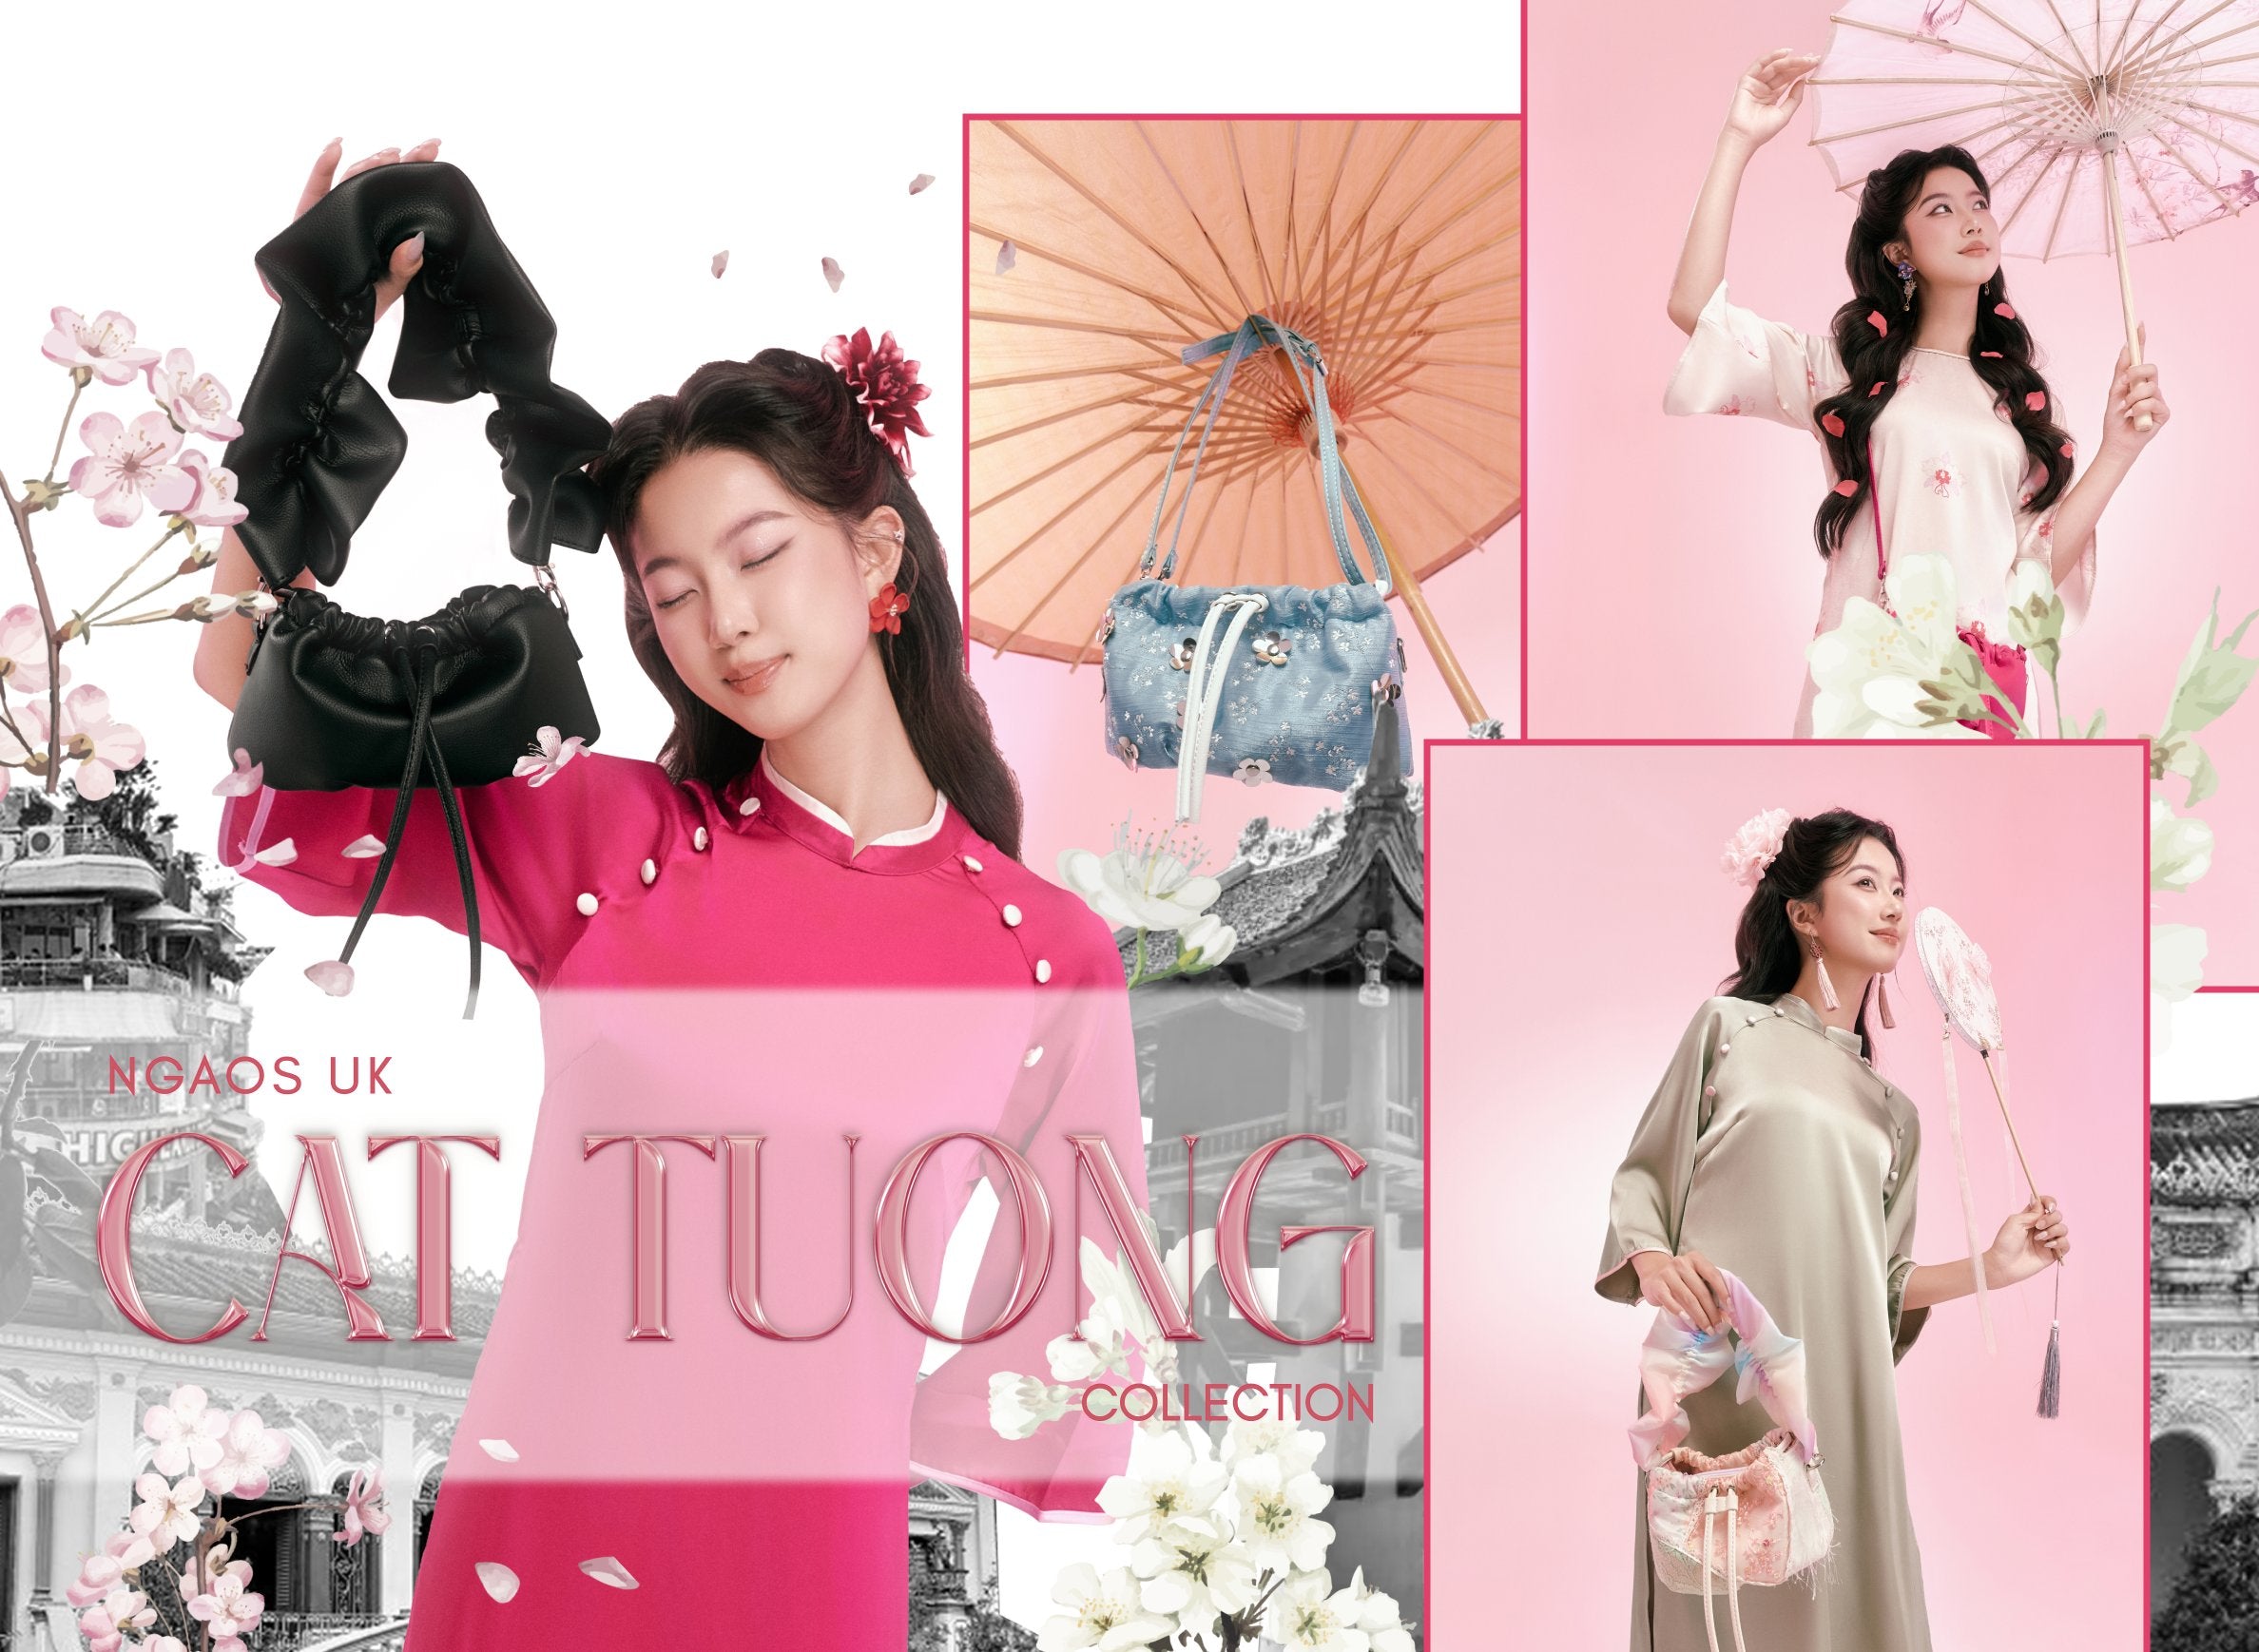 Cat Tuong Collection - New Spring Collection NGAOS UK